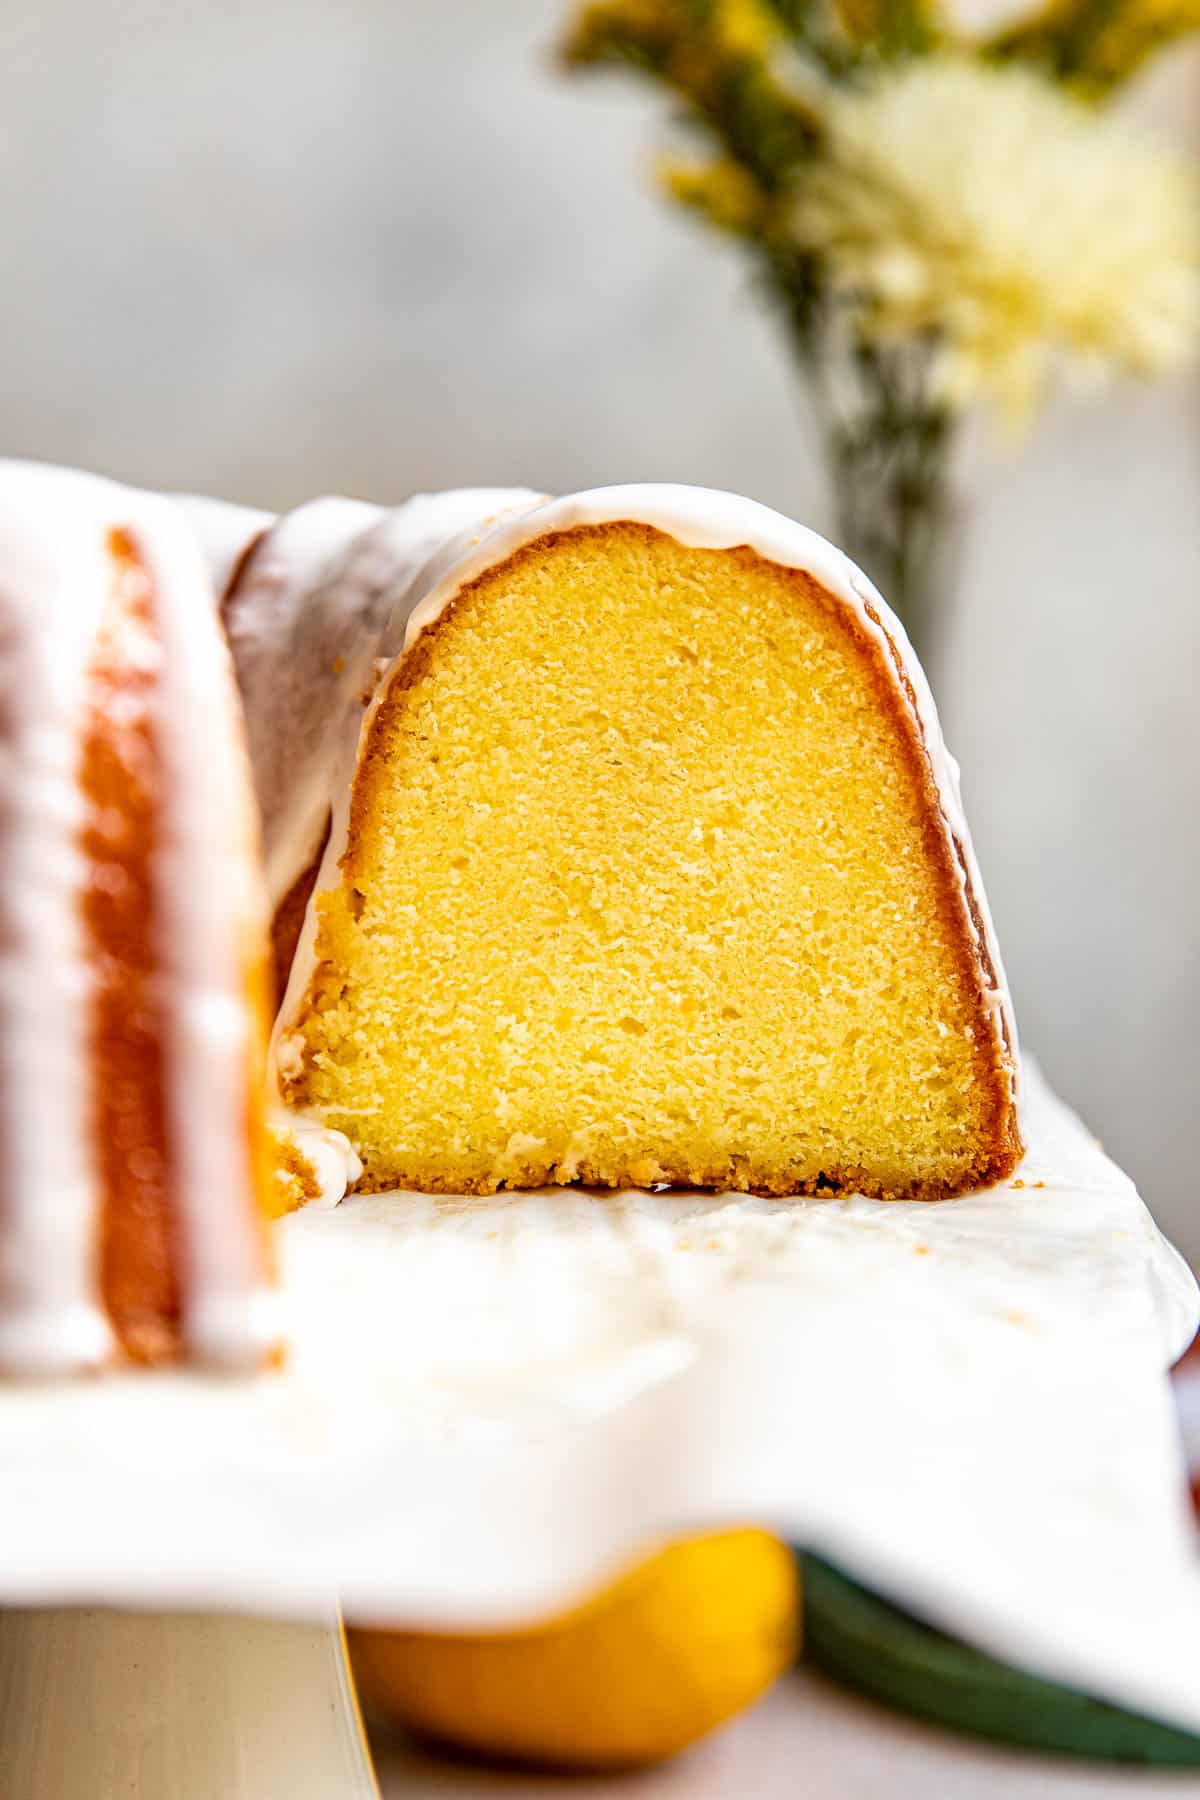 a close up image of a slice of pound cake made with lemons.